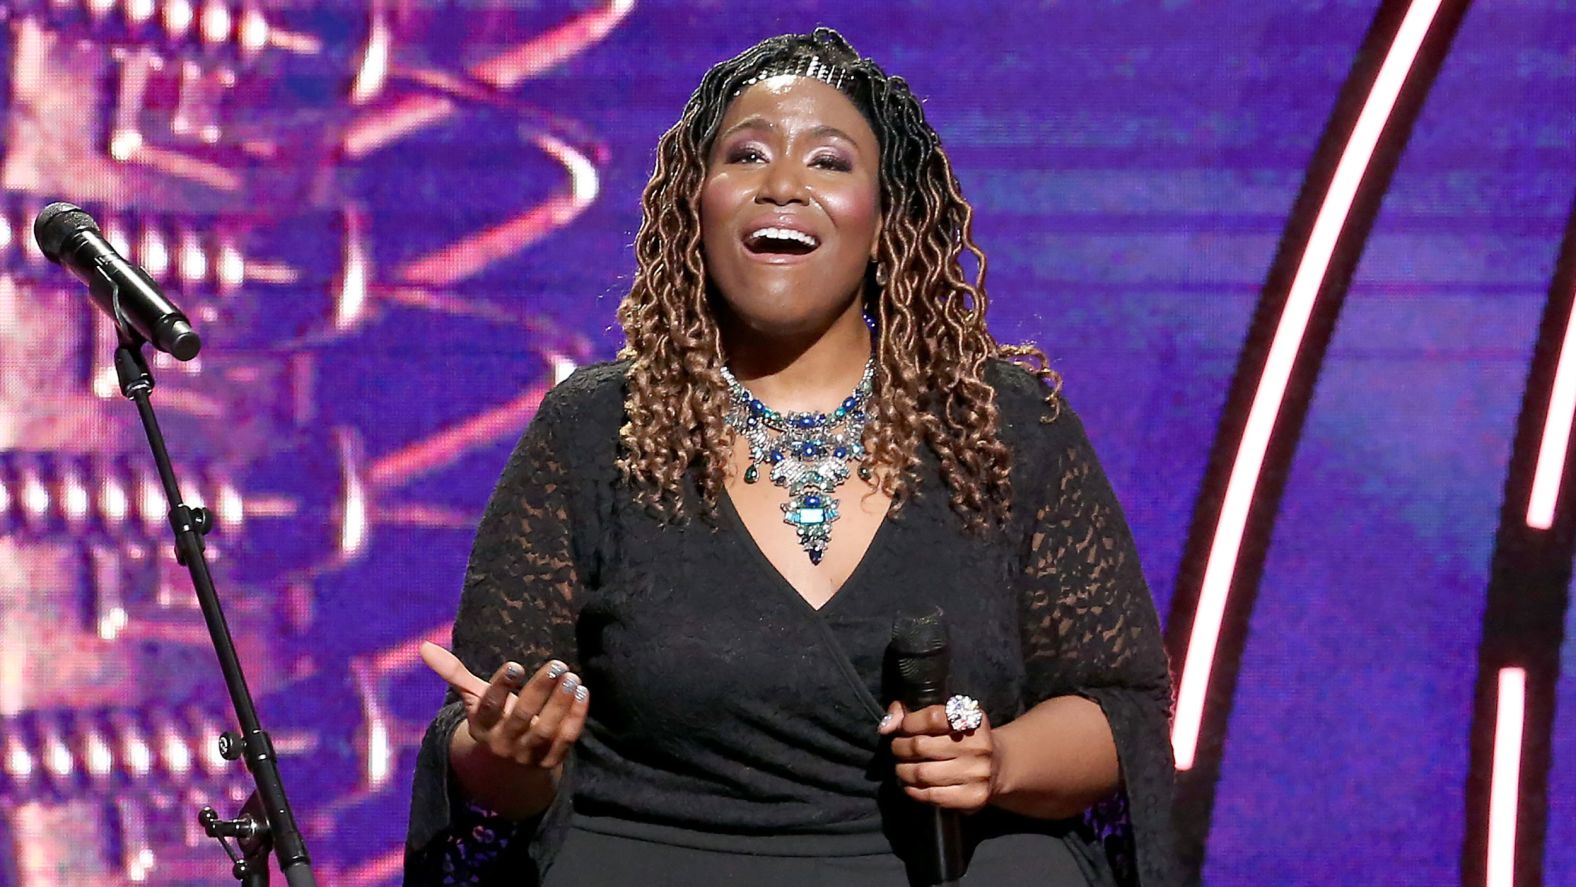 Soulful gospel artist <a href="https://www.cnn.com/2024/04/19/entertainment/mandisa-death/index.html" target="_blank">Mandisa</a>, a Grammy-winning singer who got her start as a contestant on "American Idol" in 2006, has died, according to a statement on her verified social media on Friday, April 19. She was 47.